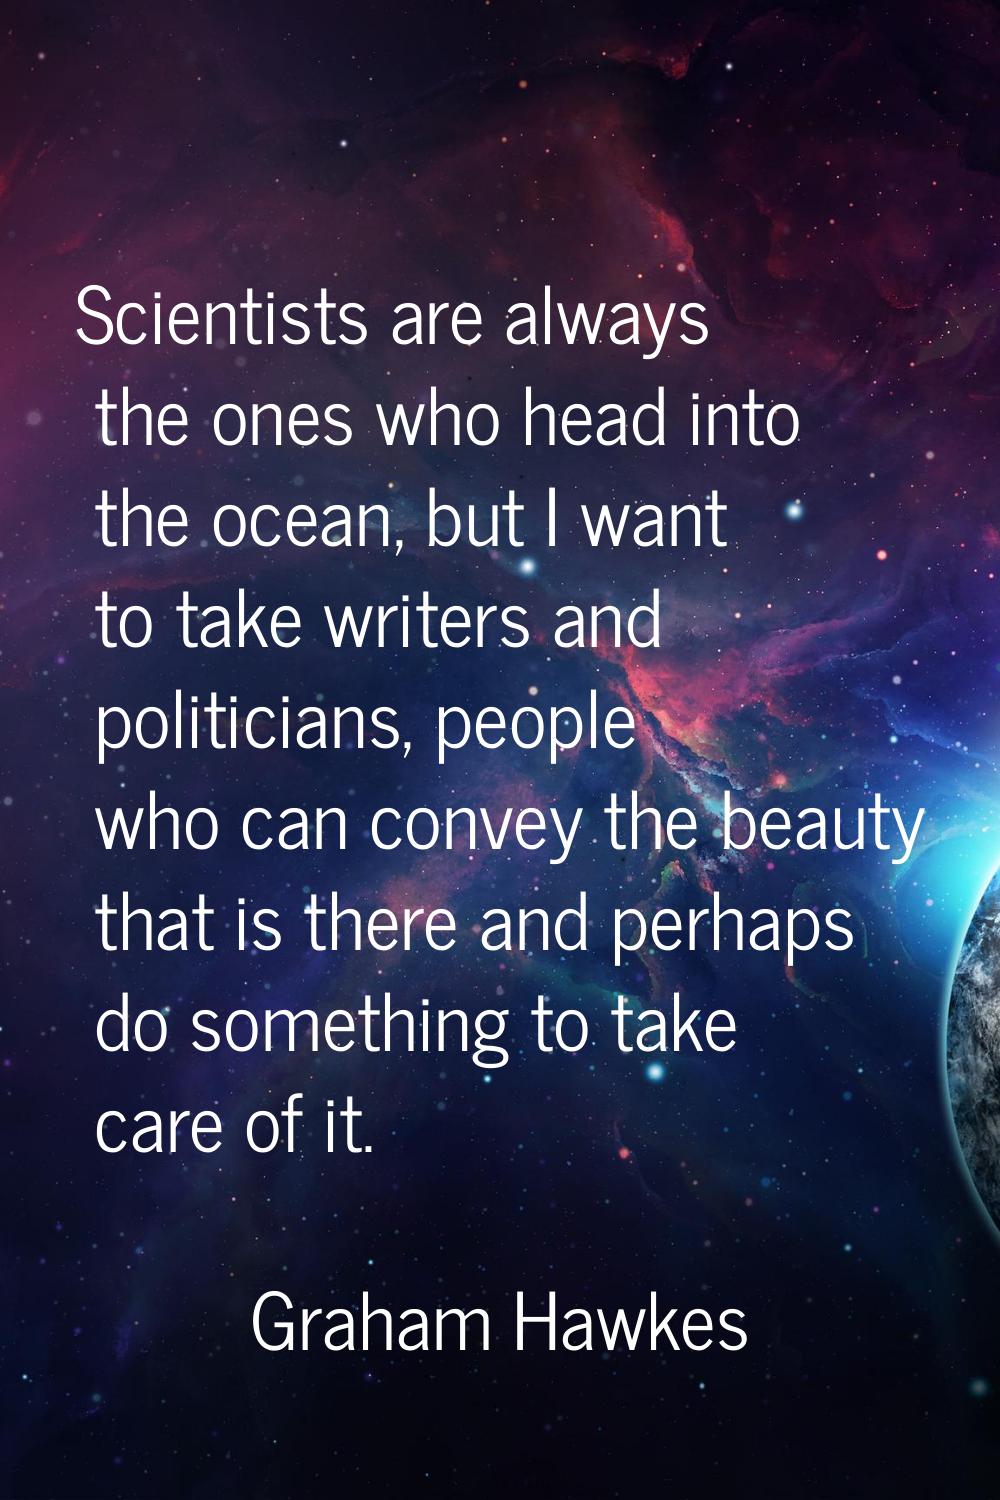 Scientists are always the ones who head into the ocean, but I want to take writers and politicians,